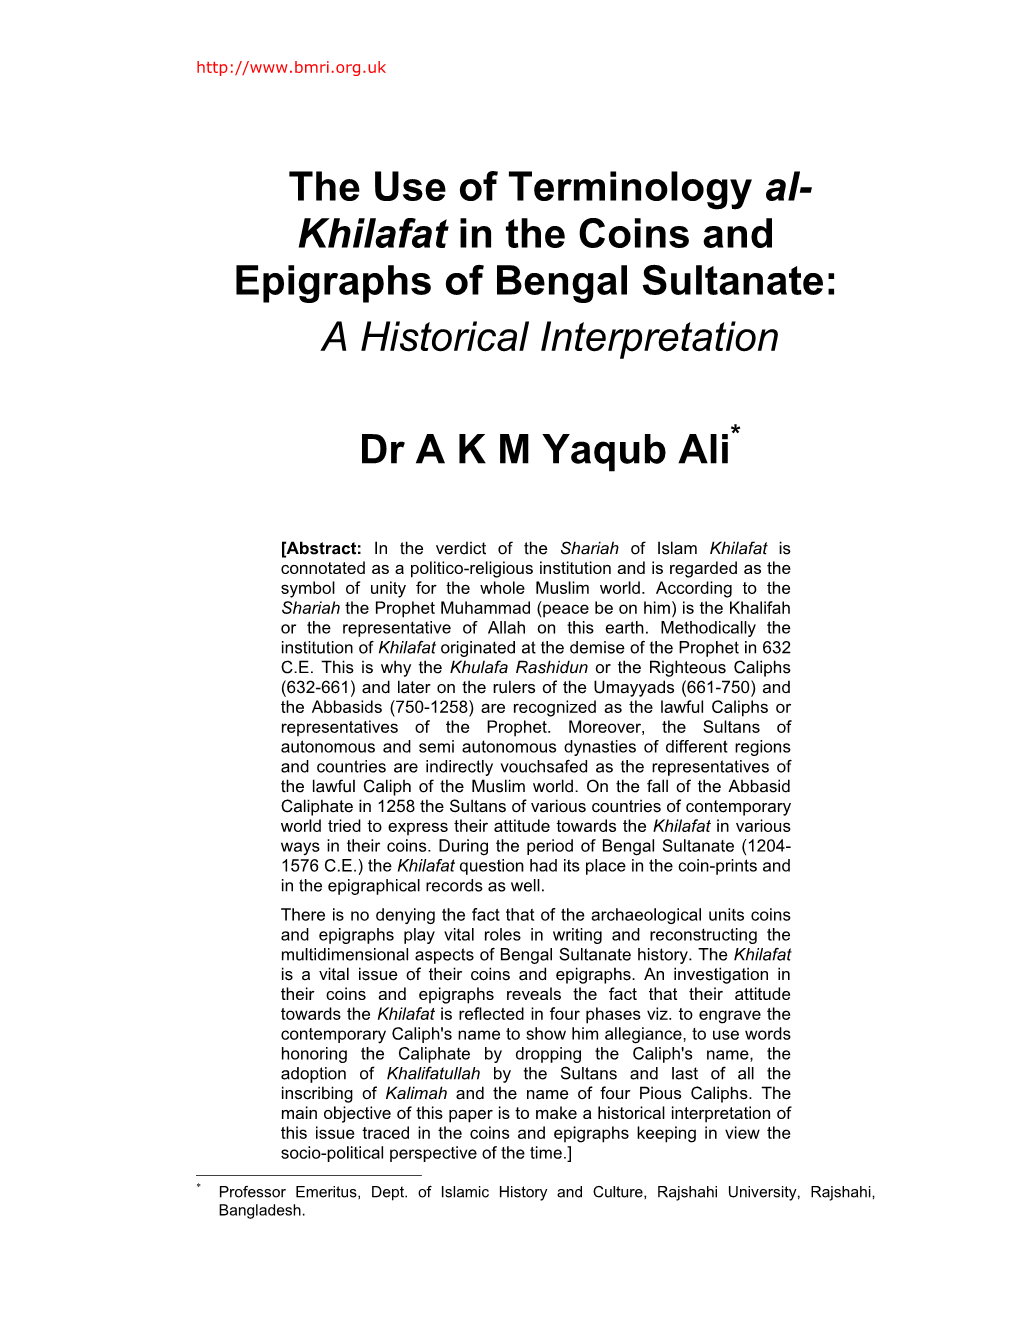 The Use of Terminology Al- Khilafat in the Coins and Epigraphs of Bengal Sultanate: a Historical Interpretation